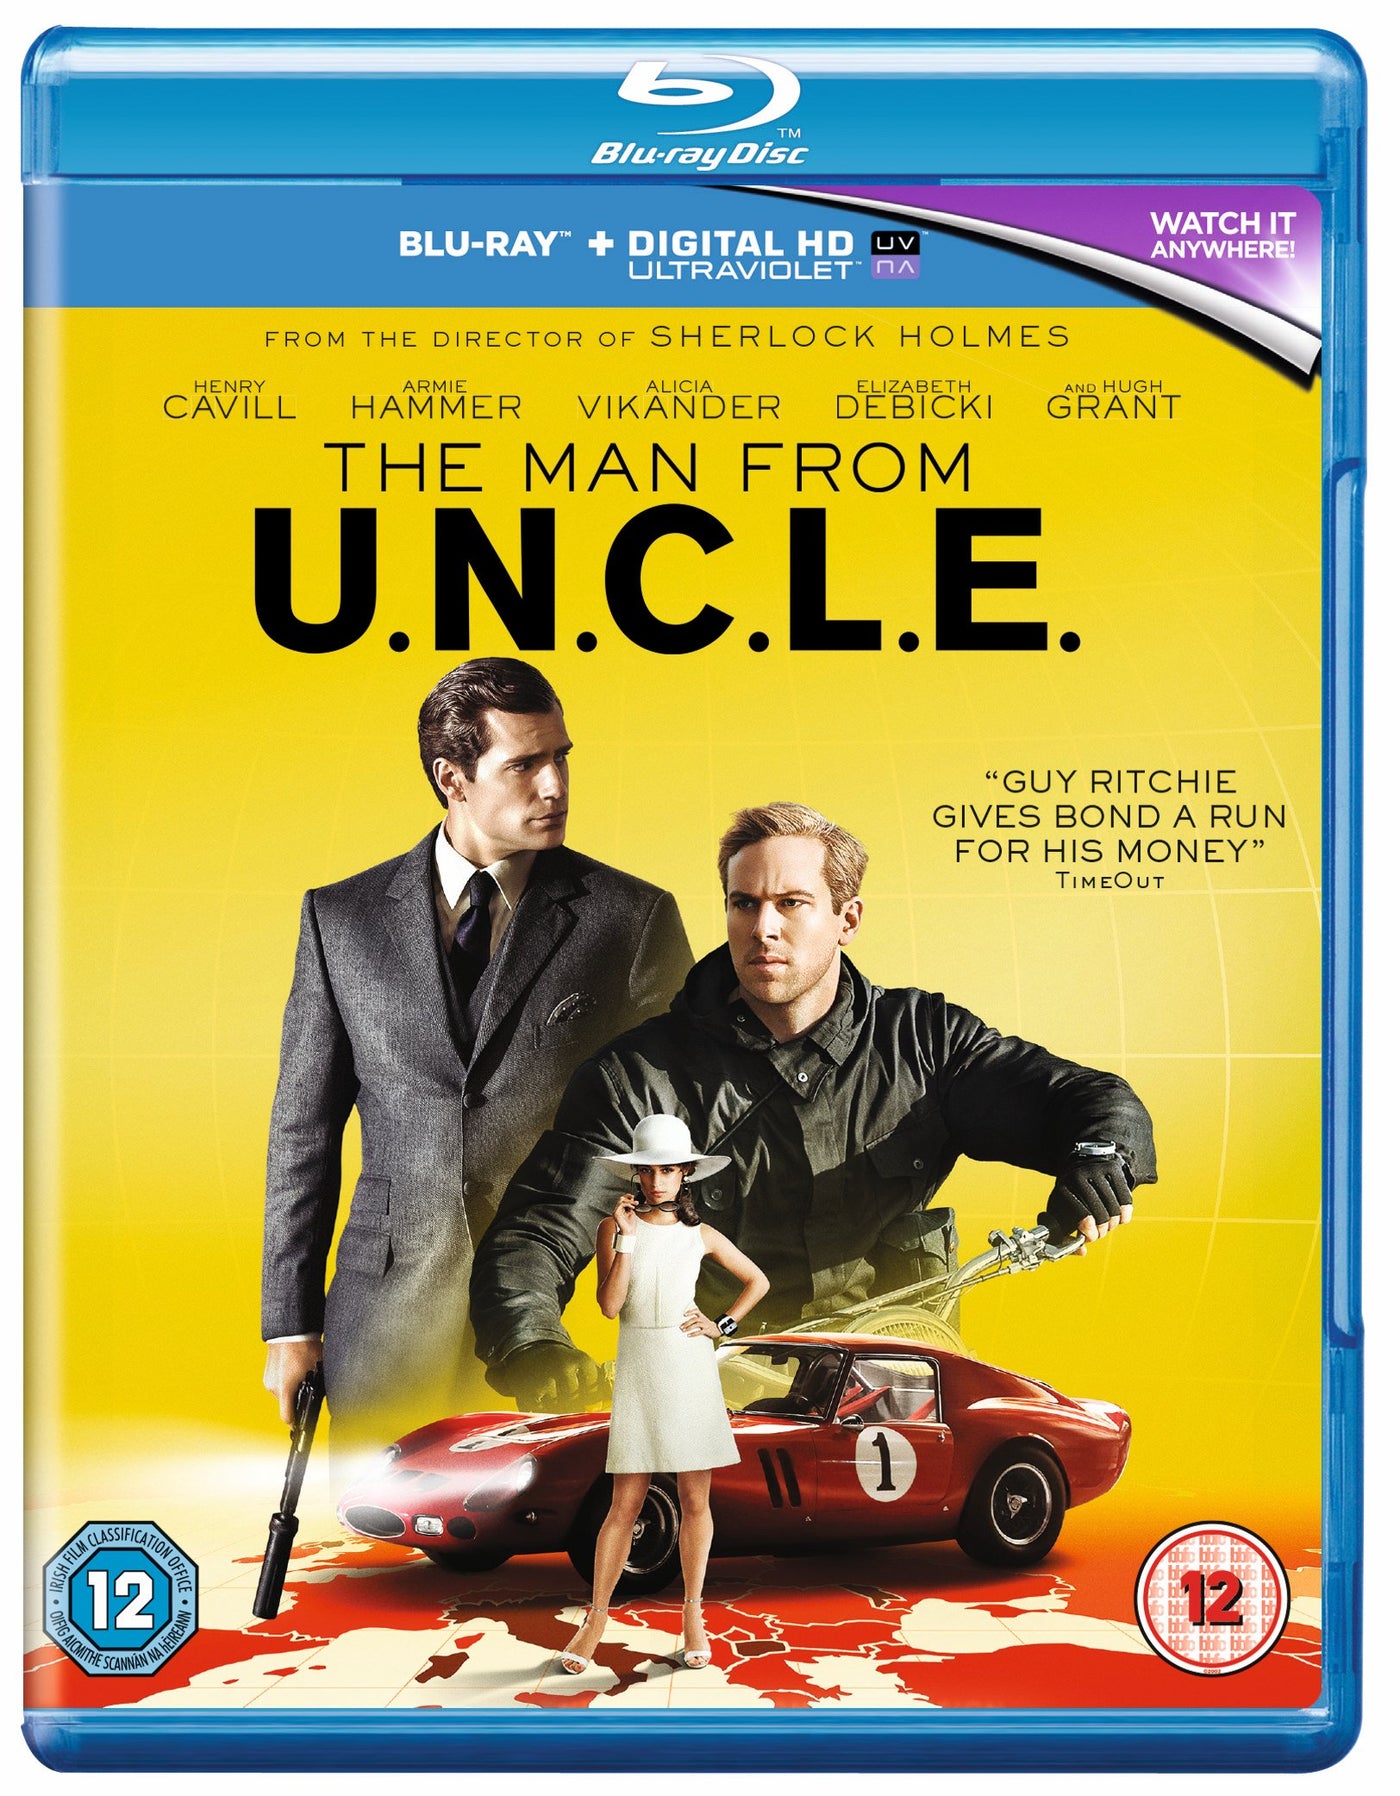 The Man from U.N.C.L.E. (Blu-ray)